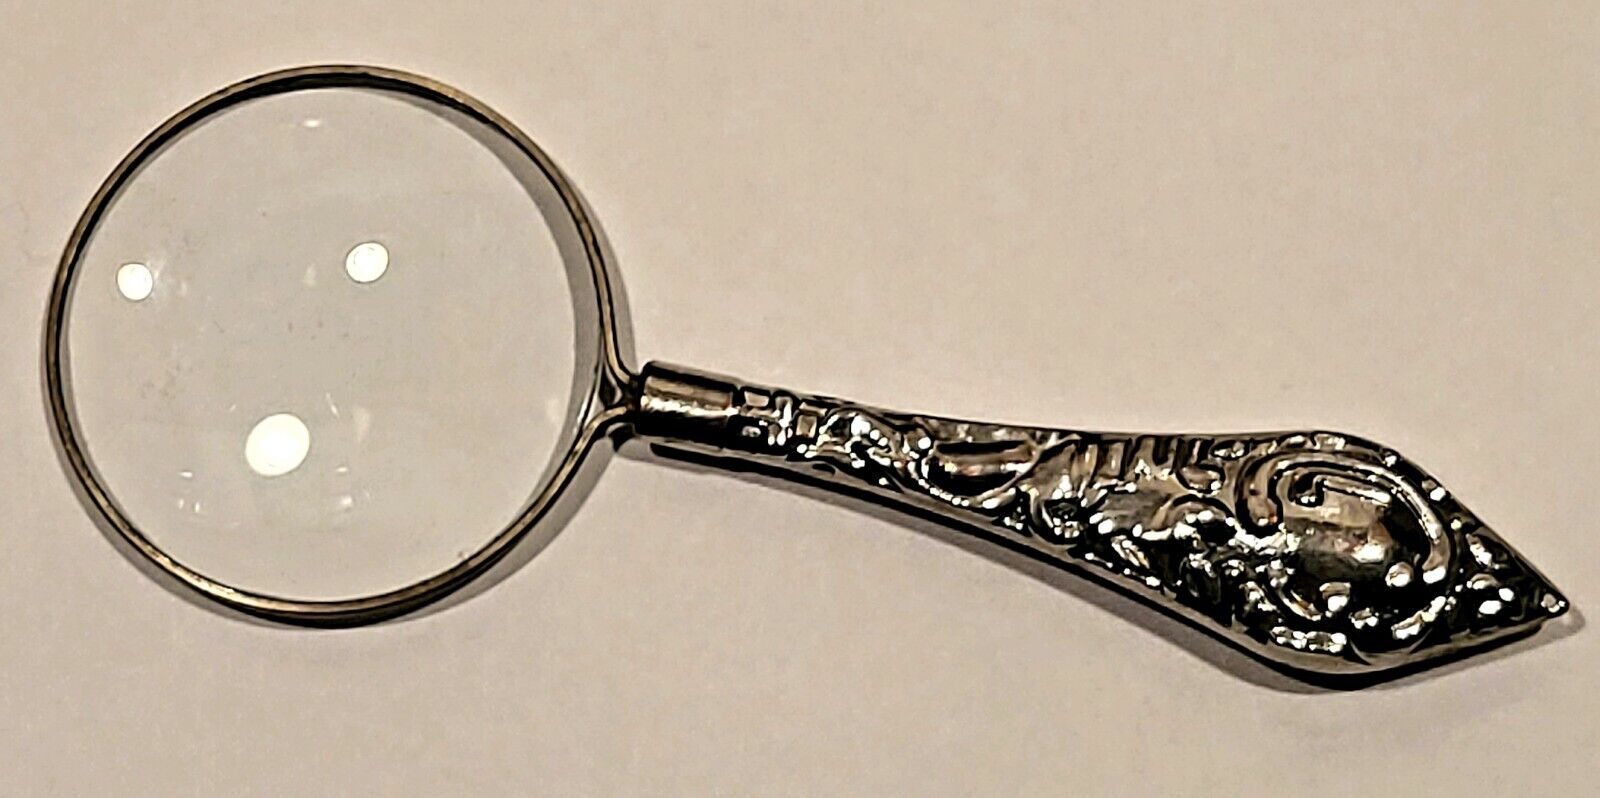 Magnifying Glass Vintage/Antique Silver Tone Ornate Magnifying Glass Nice